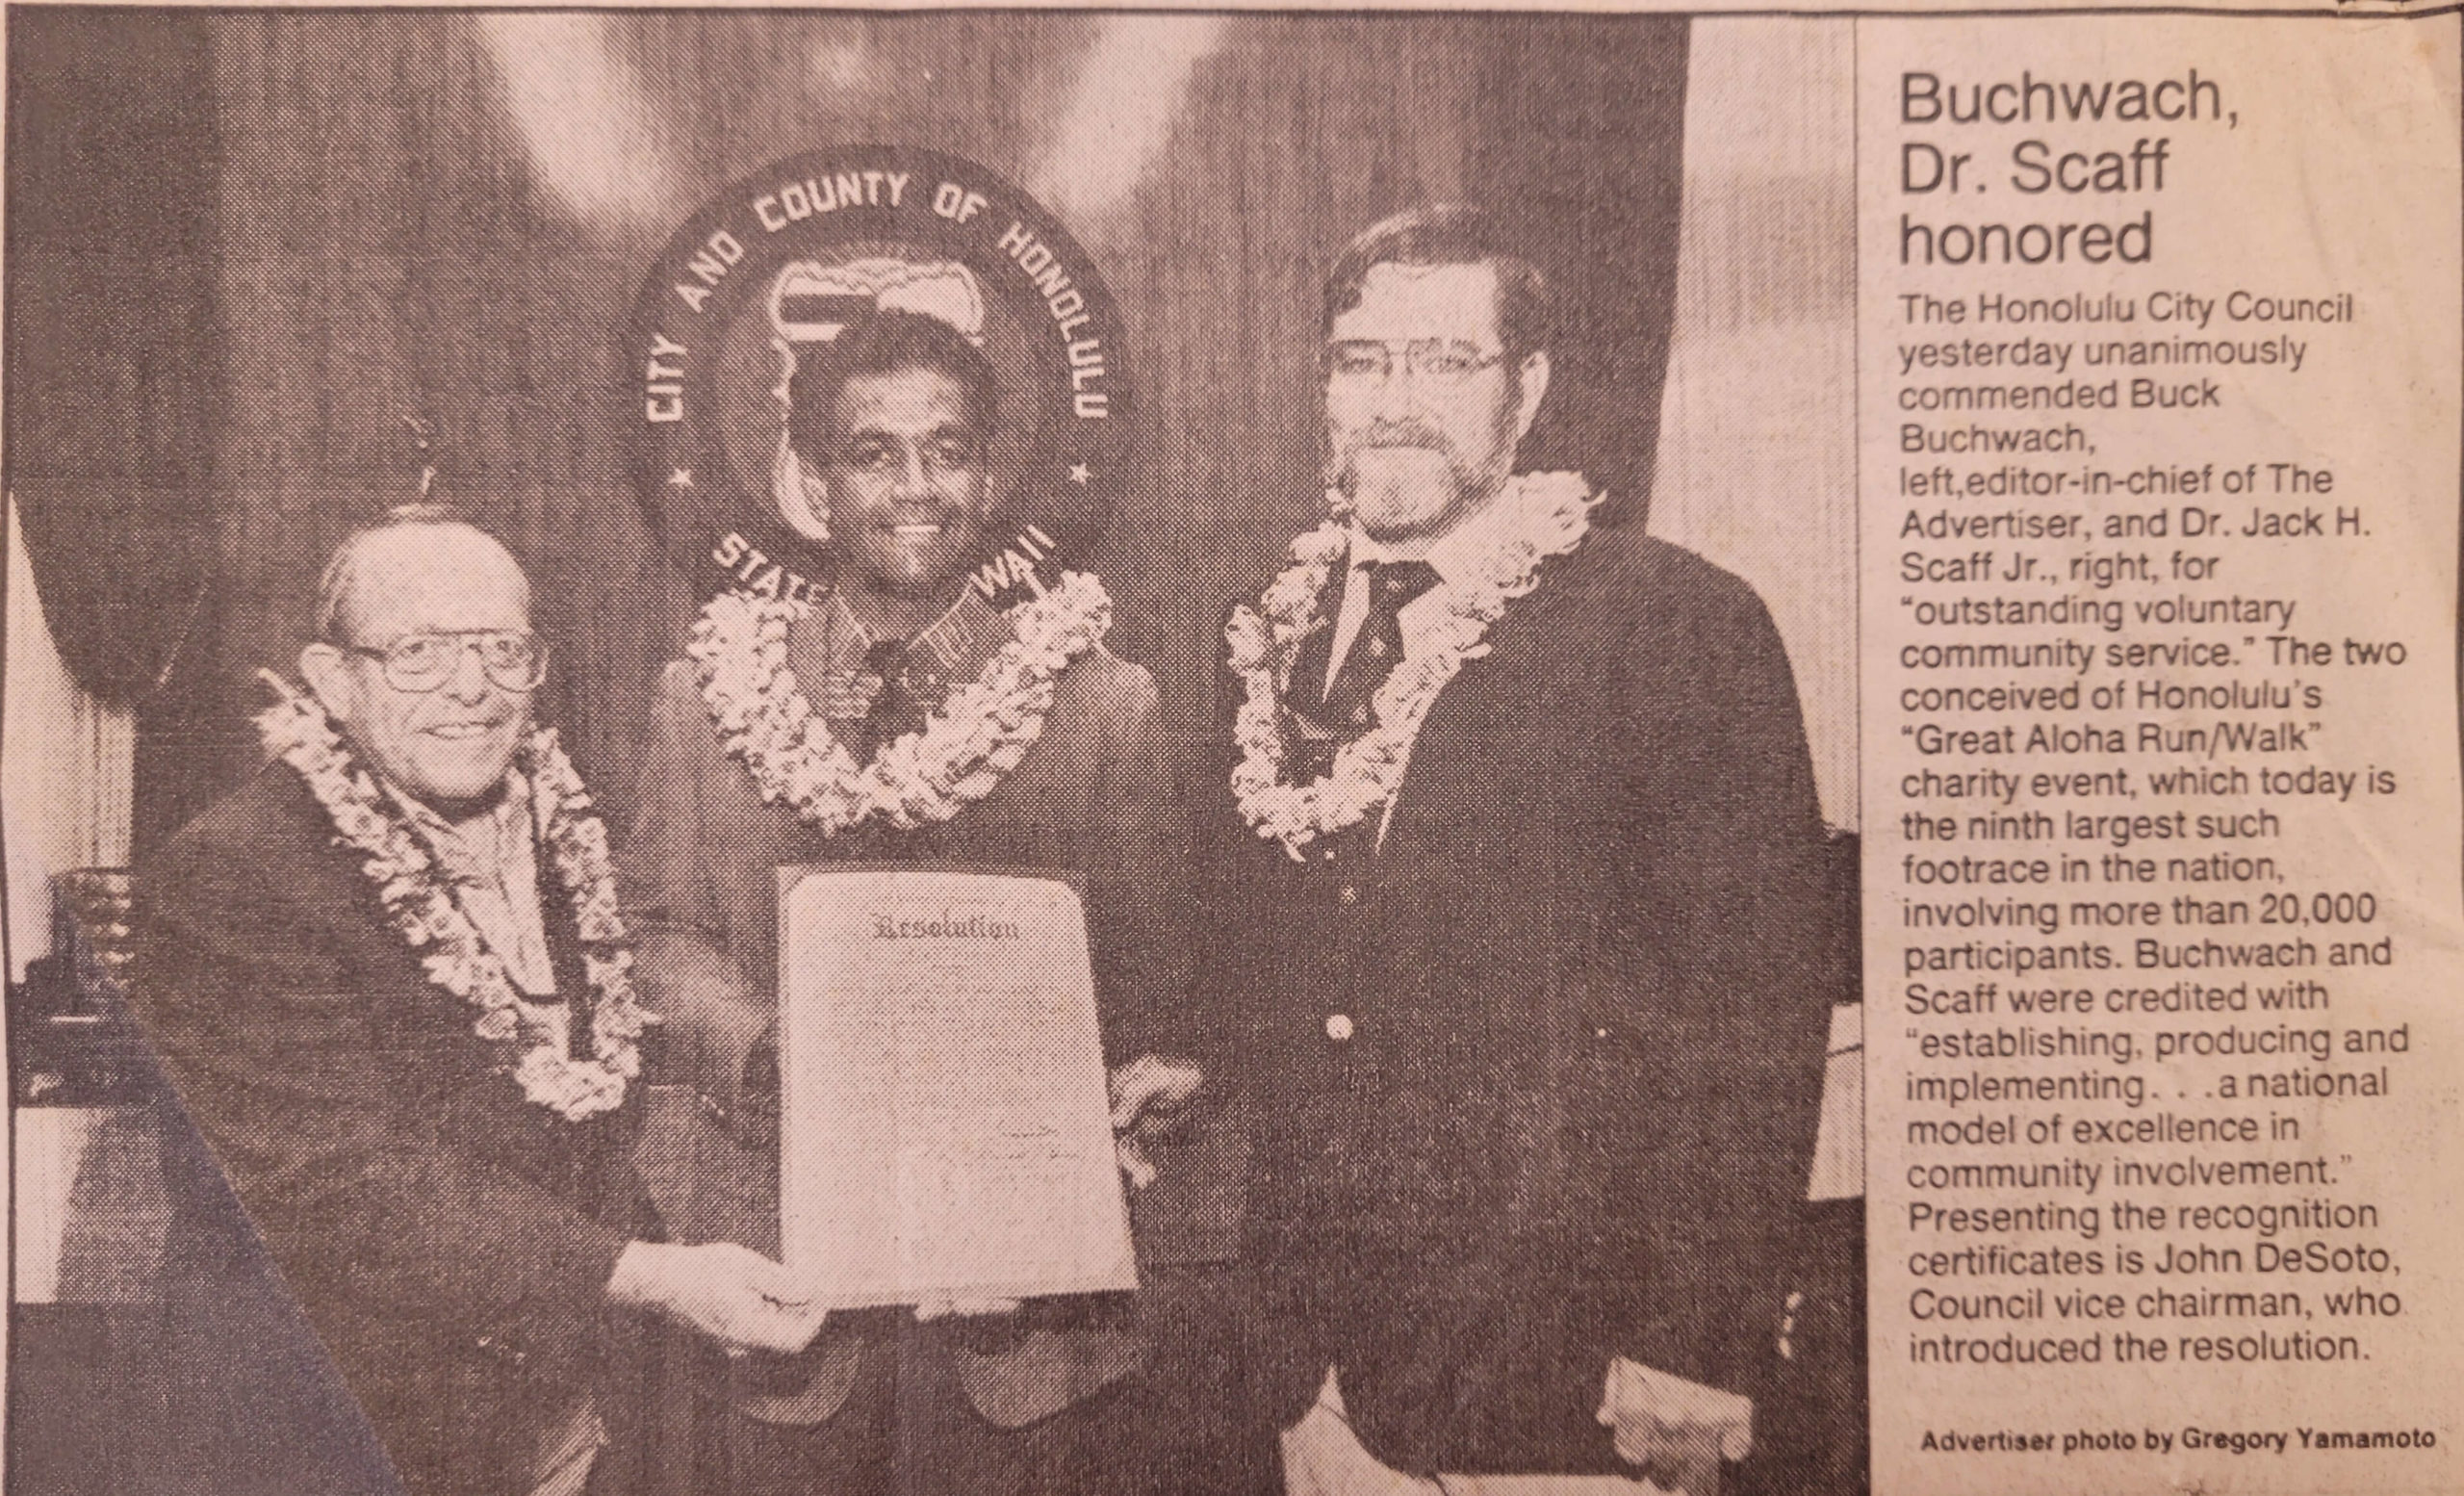 Scan of newspaper clipping with a picture of Buck Buchwach, Honolulu City Council vice chairman John DeSoto, and Dr. Jack Scaff, and the article text beside it.